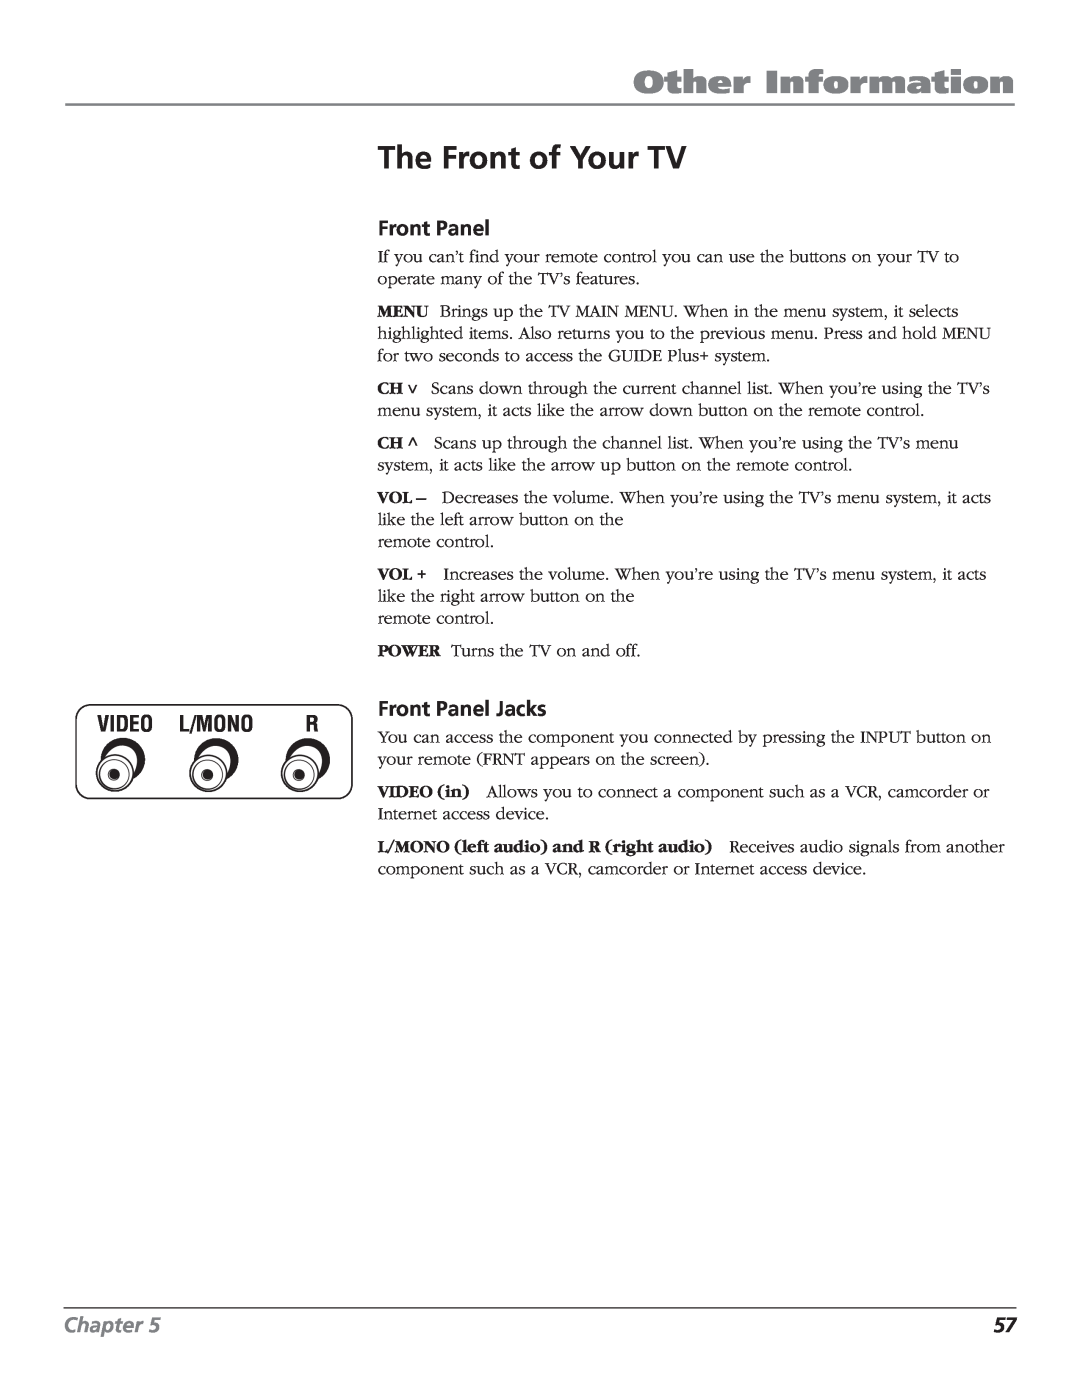 RCA F27669 manual The Front of Your TV, Other Information, Video L/Mono R, Front Panel Jacks, Chapter 